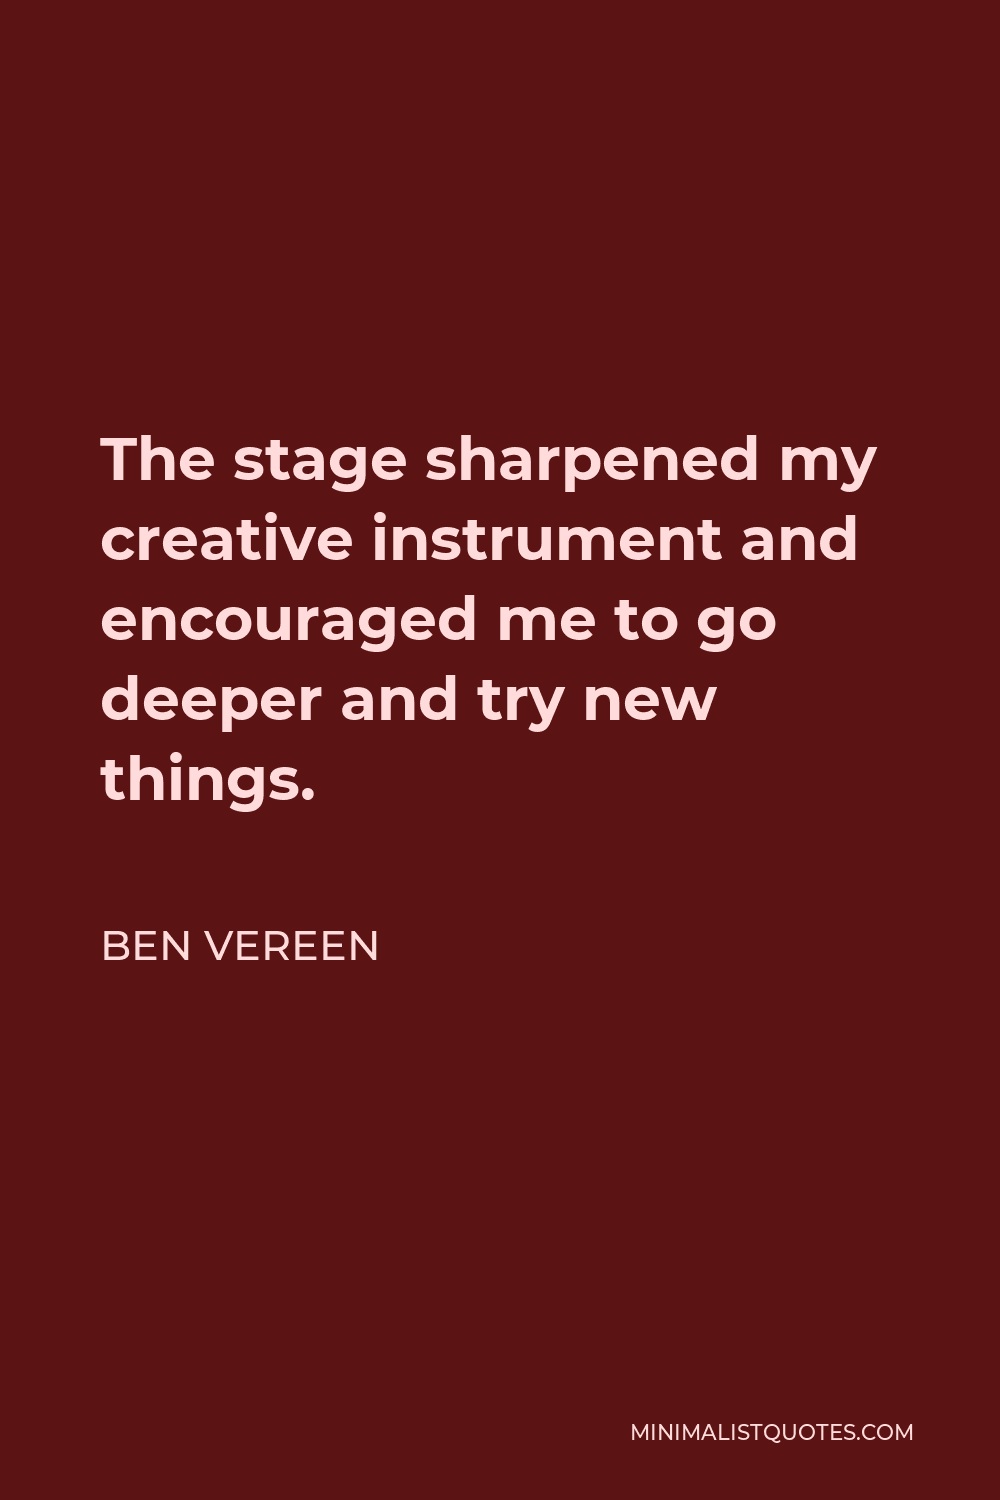 Ben Vereen Quote - The stage sharpened my creative instrument and encouraged me to go deeper and try new things.